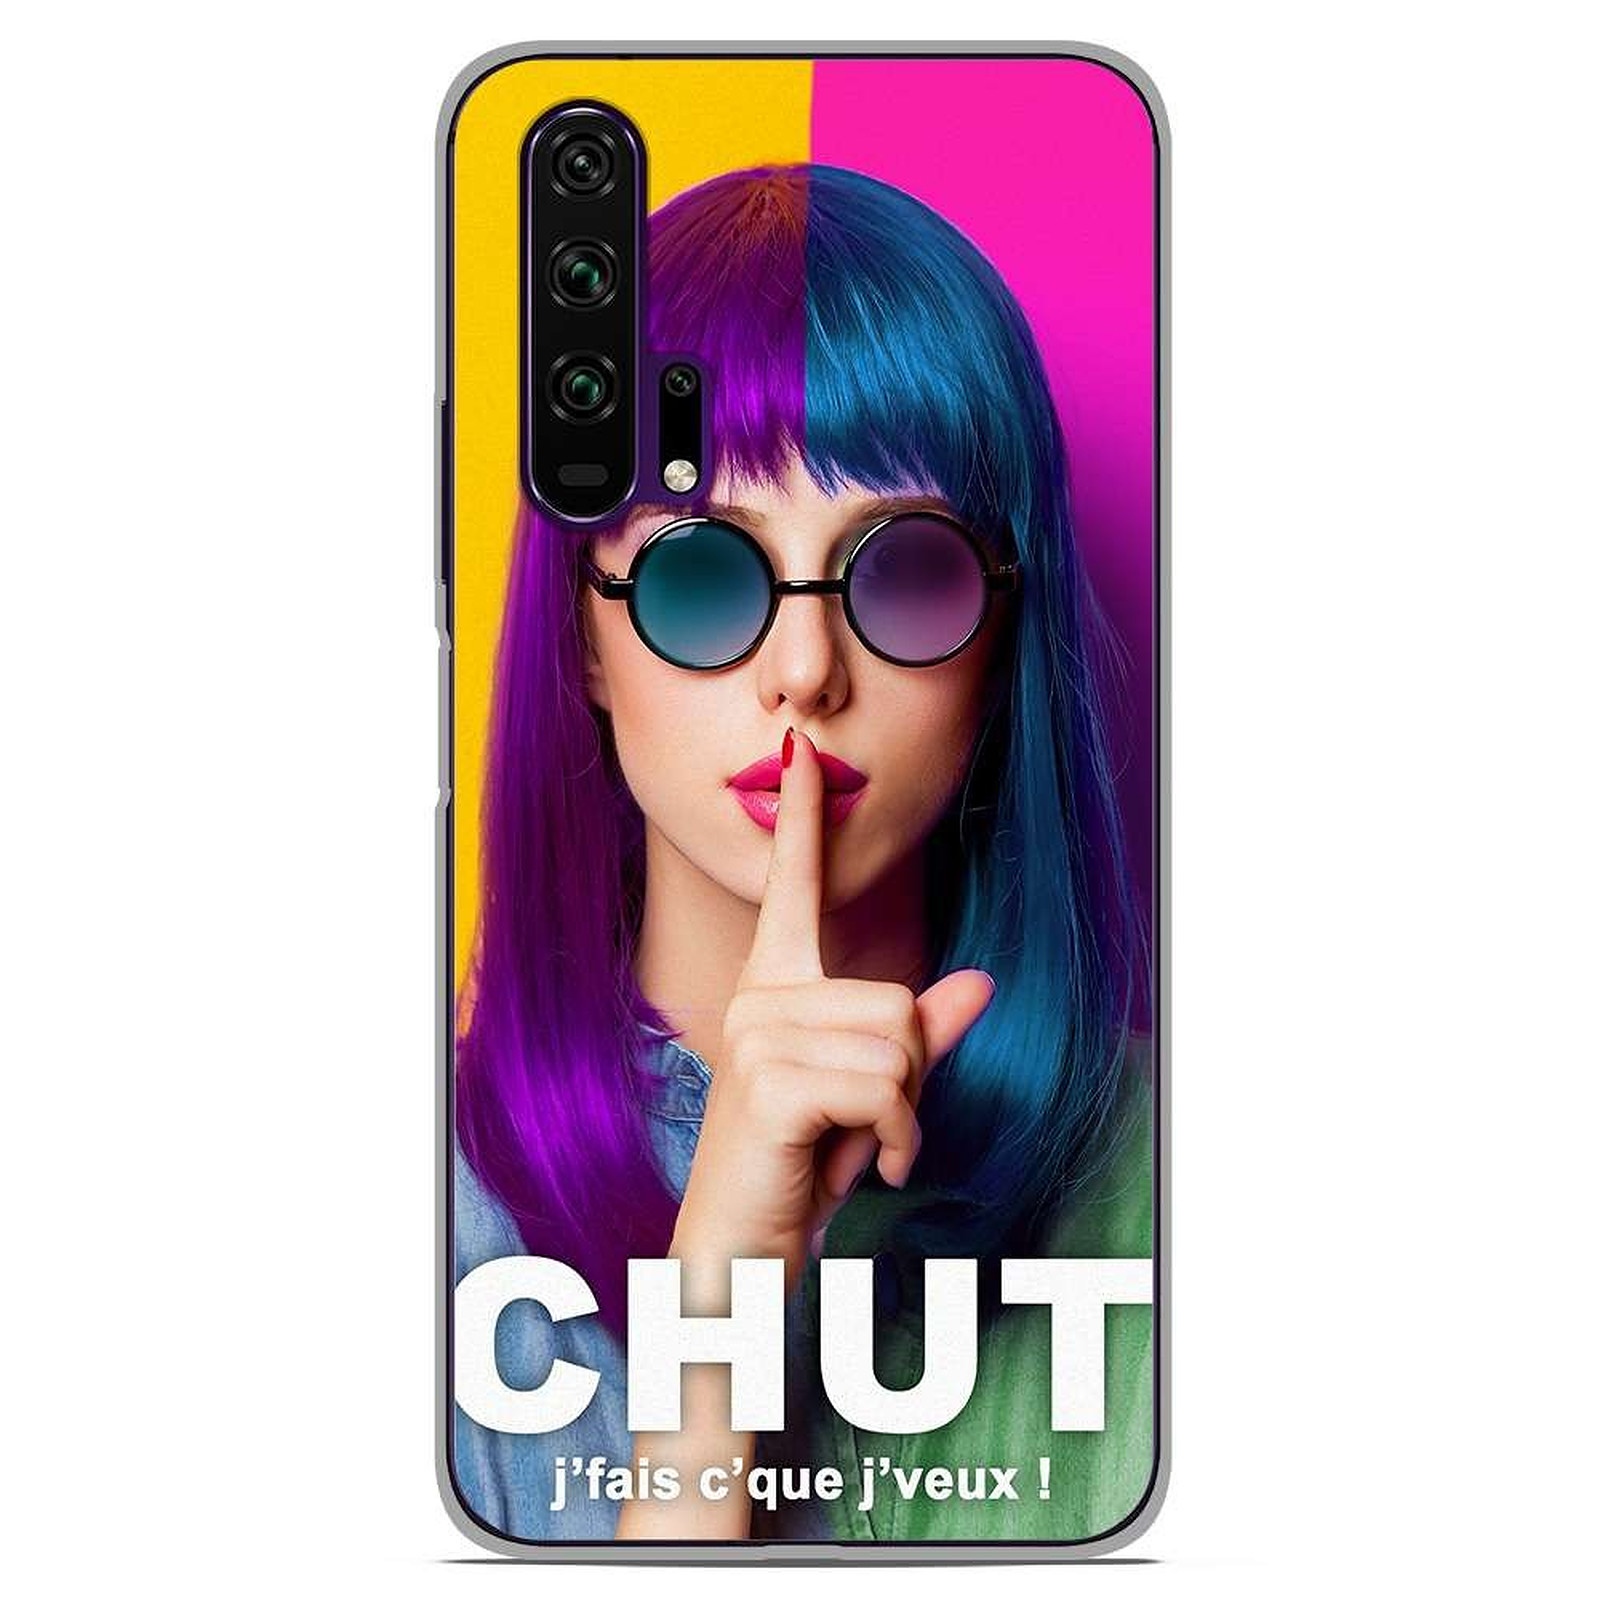 1001 Coques Coque silicone gel Huawei Honor 20 Pro motif Chut - Coque telephone 1001Coques